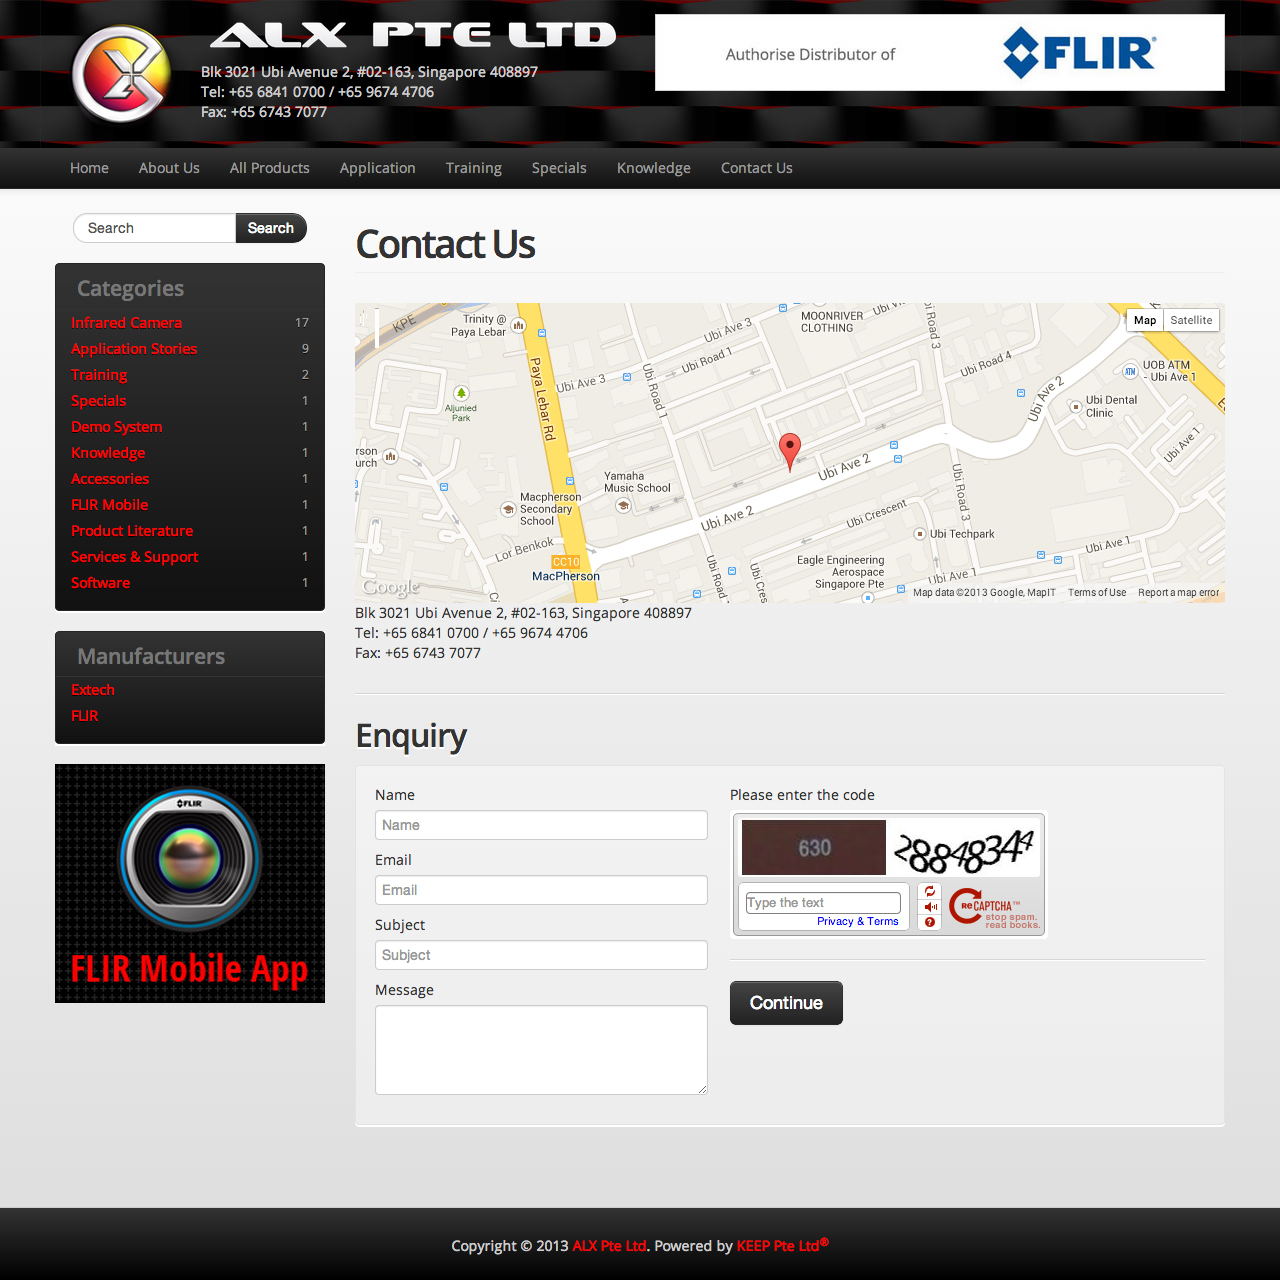 ALX Pte Ltd website contact us page